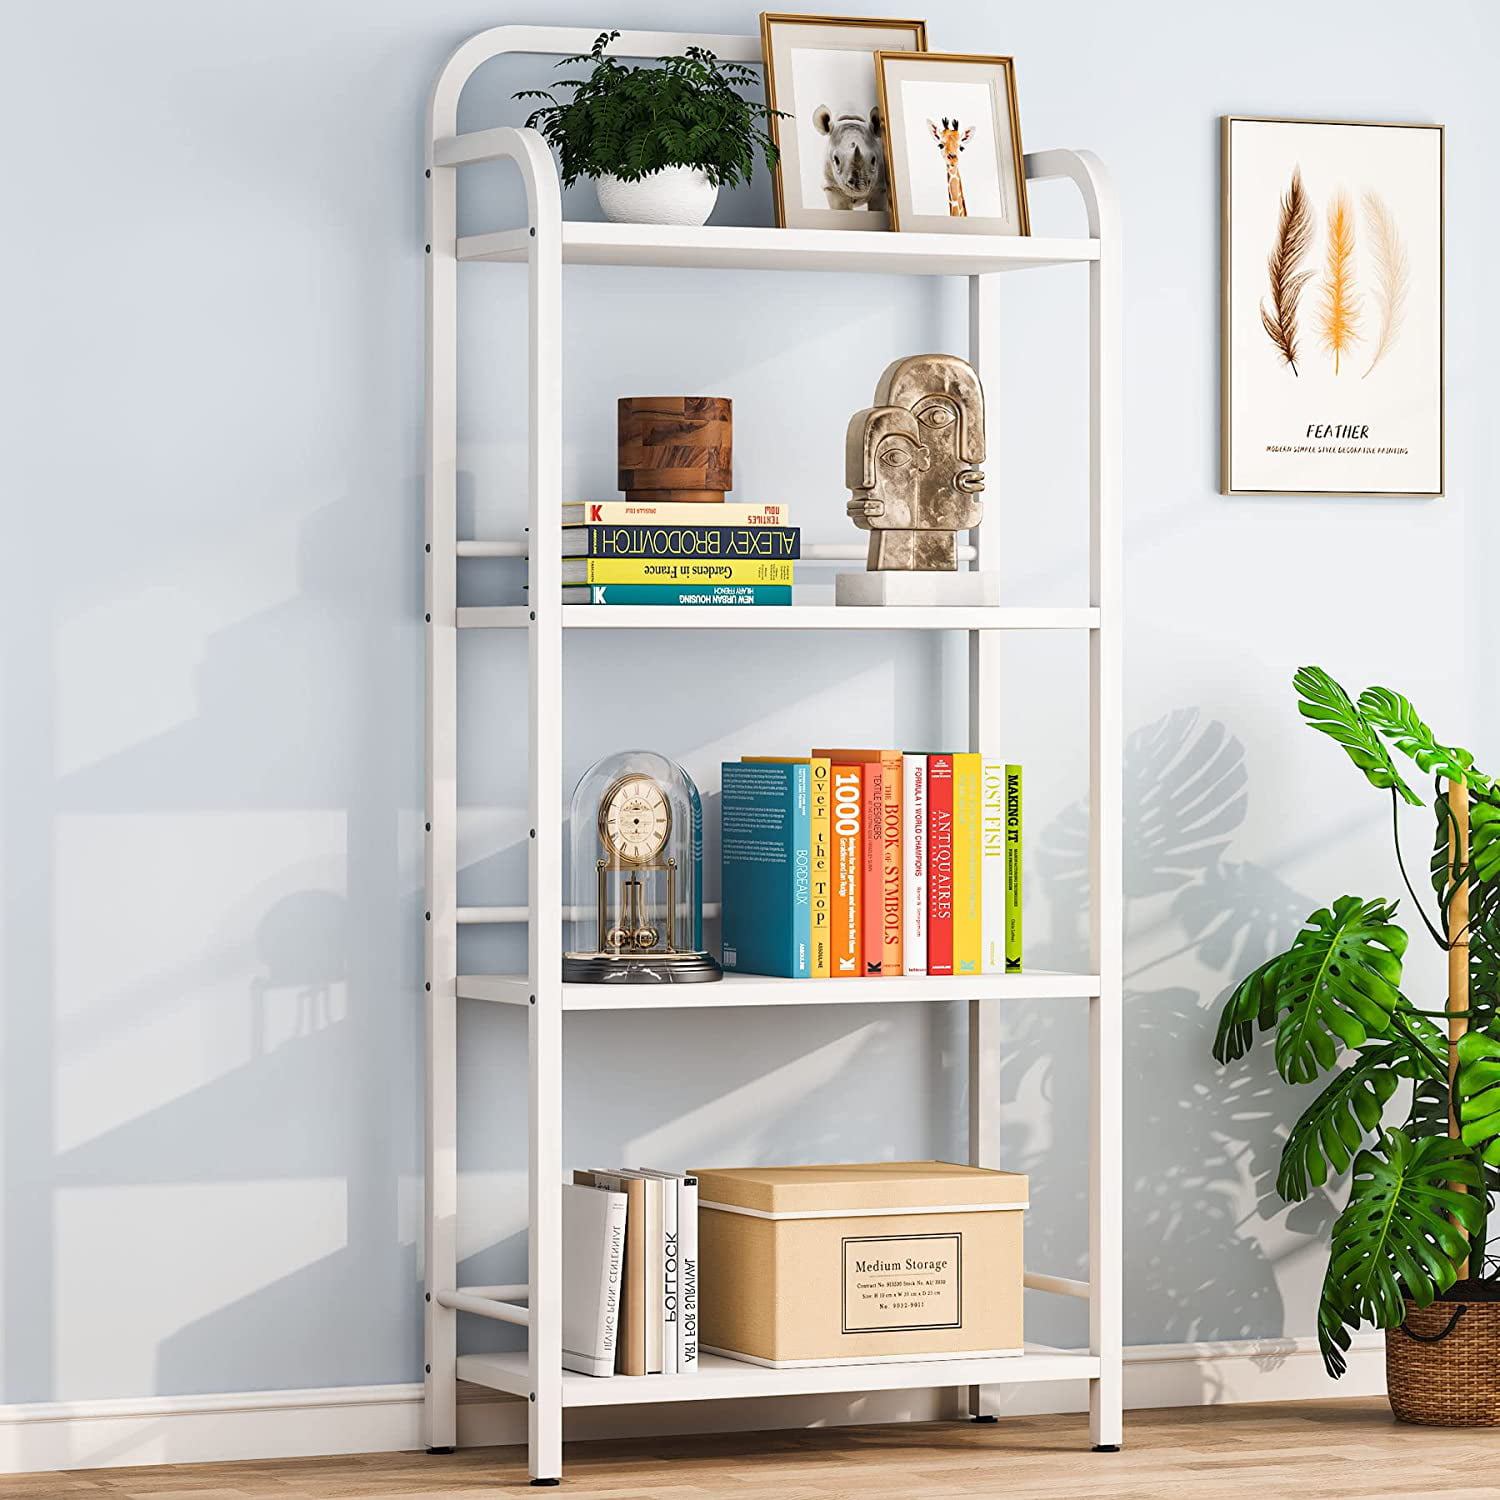 Details about   Cube Wall Bookcase Bookshelf 5/7 Cubby Shelves W/ Drawers Display Stand Office 